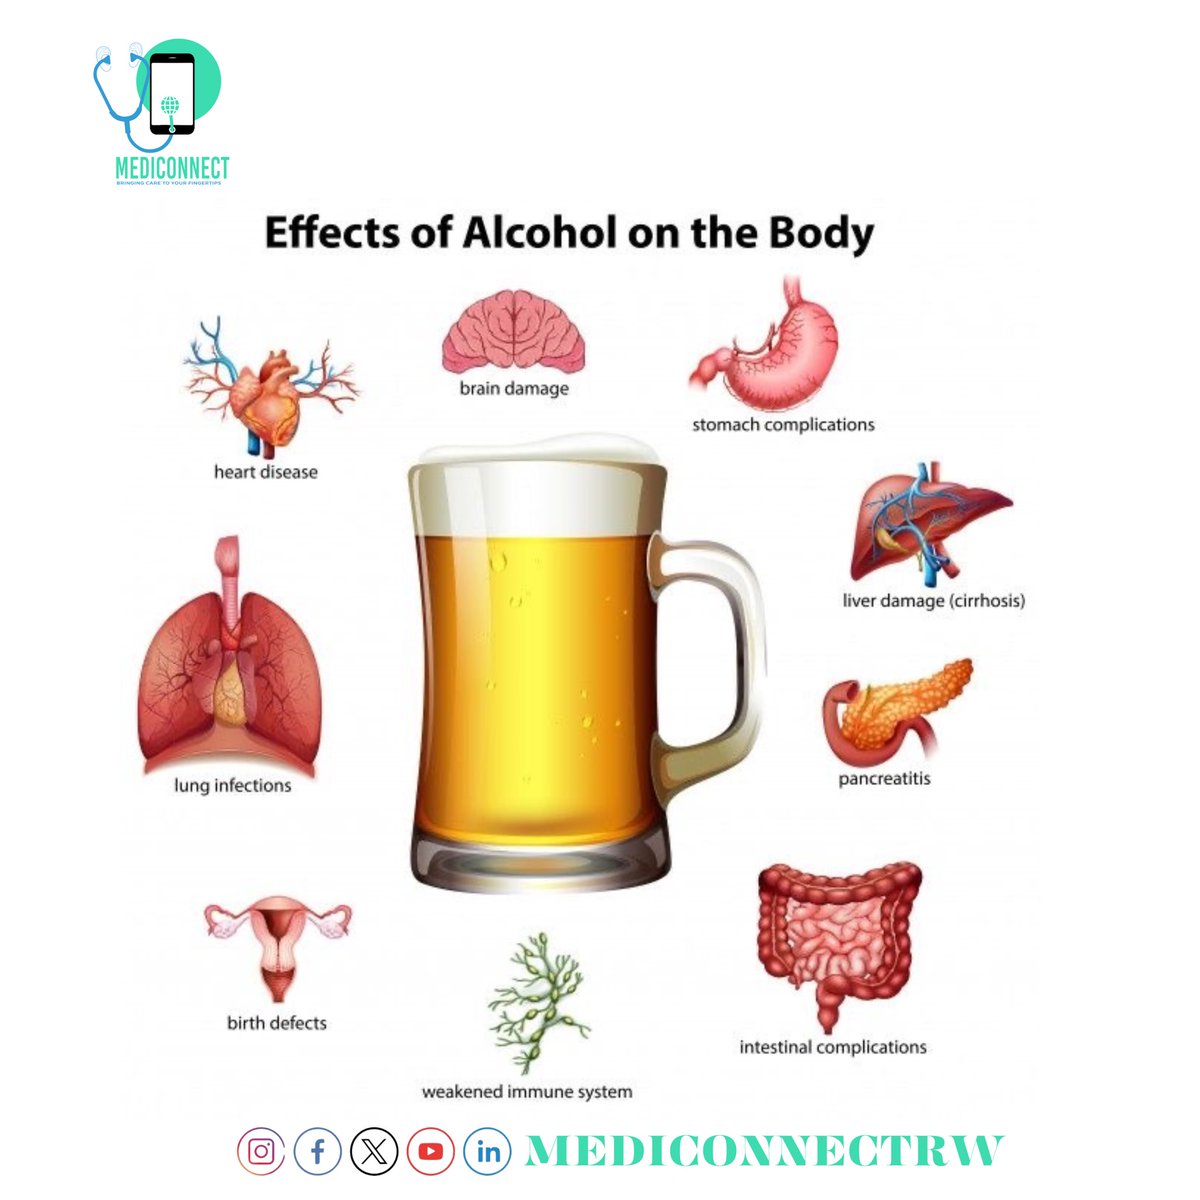 Heavy alcohol consumption harm your body significantly. Choose #healthylifestyle over instant pleasure. #tunyweless